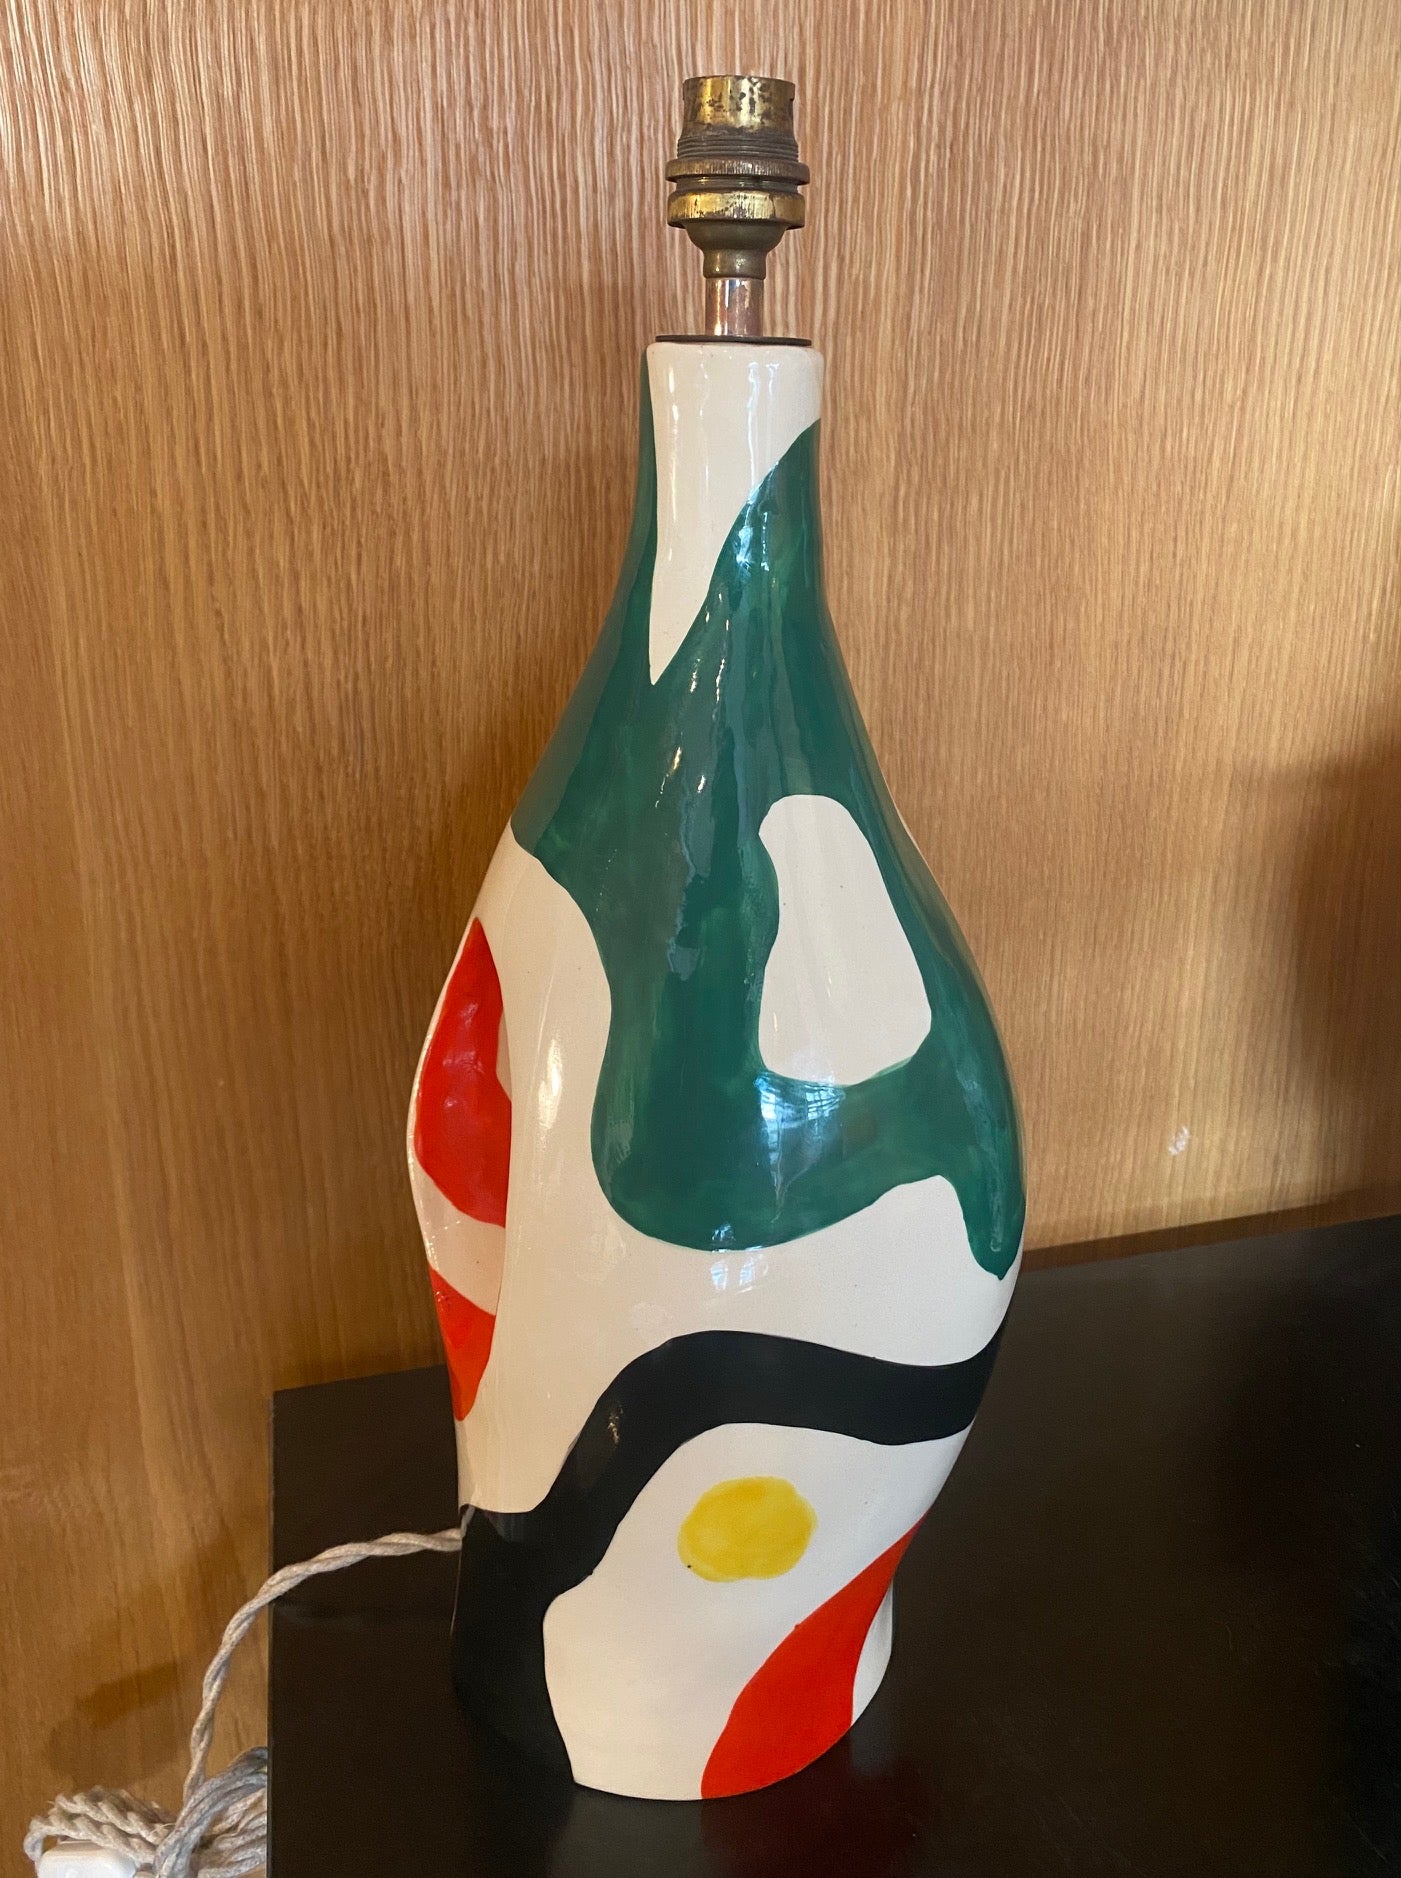 Ceramic Table Lamp by Roland Brice, Biot, France
Roland Brice worked in Biot, south in France near Vallauris and Antibes, from 1949 until his death in 1989. He was a close collaborator of Fernand Léger.